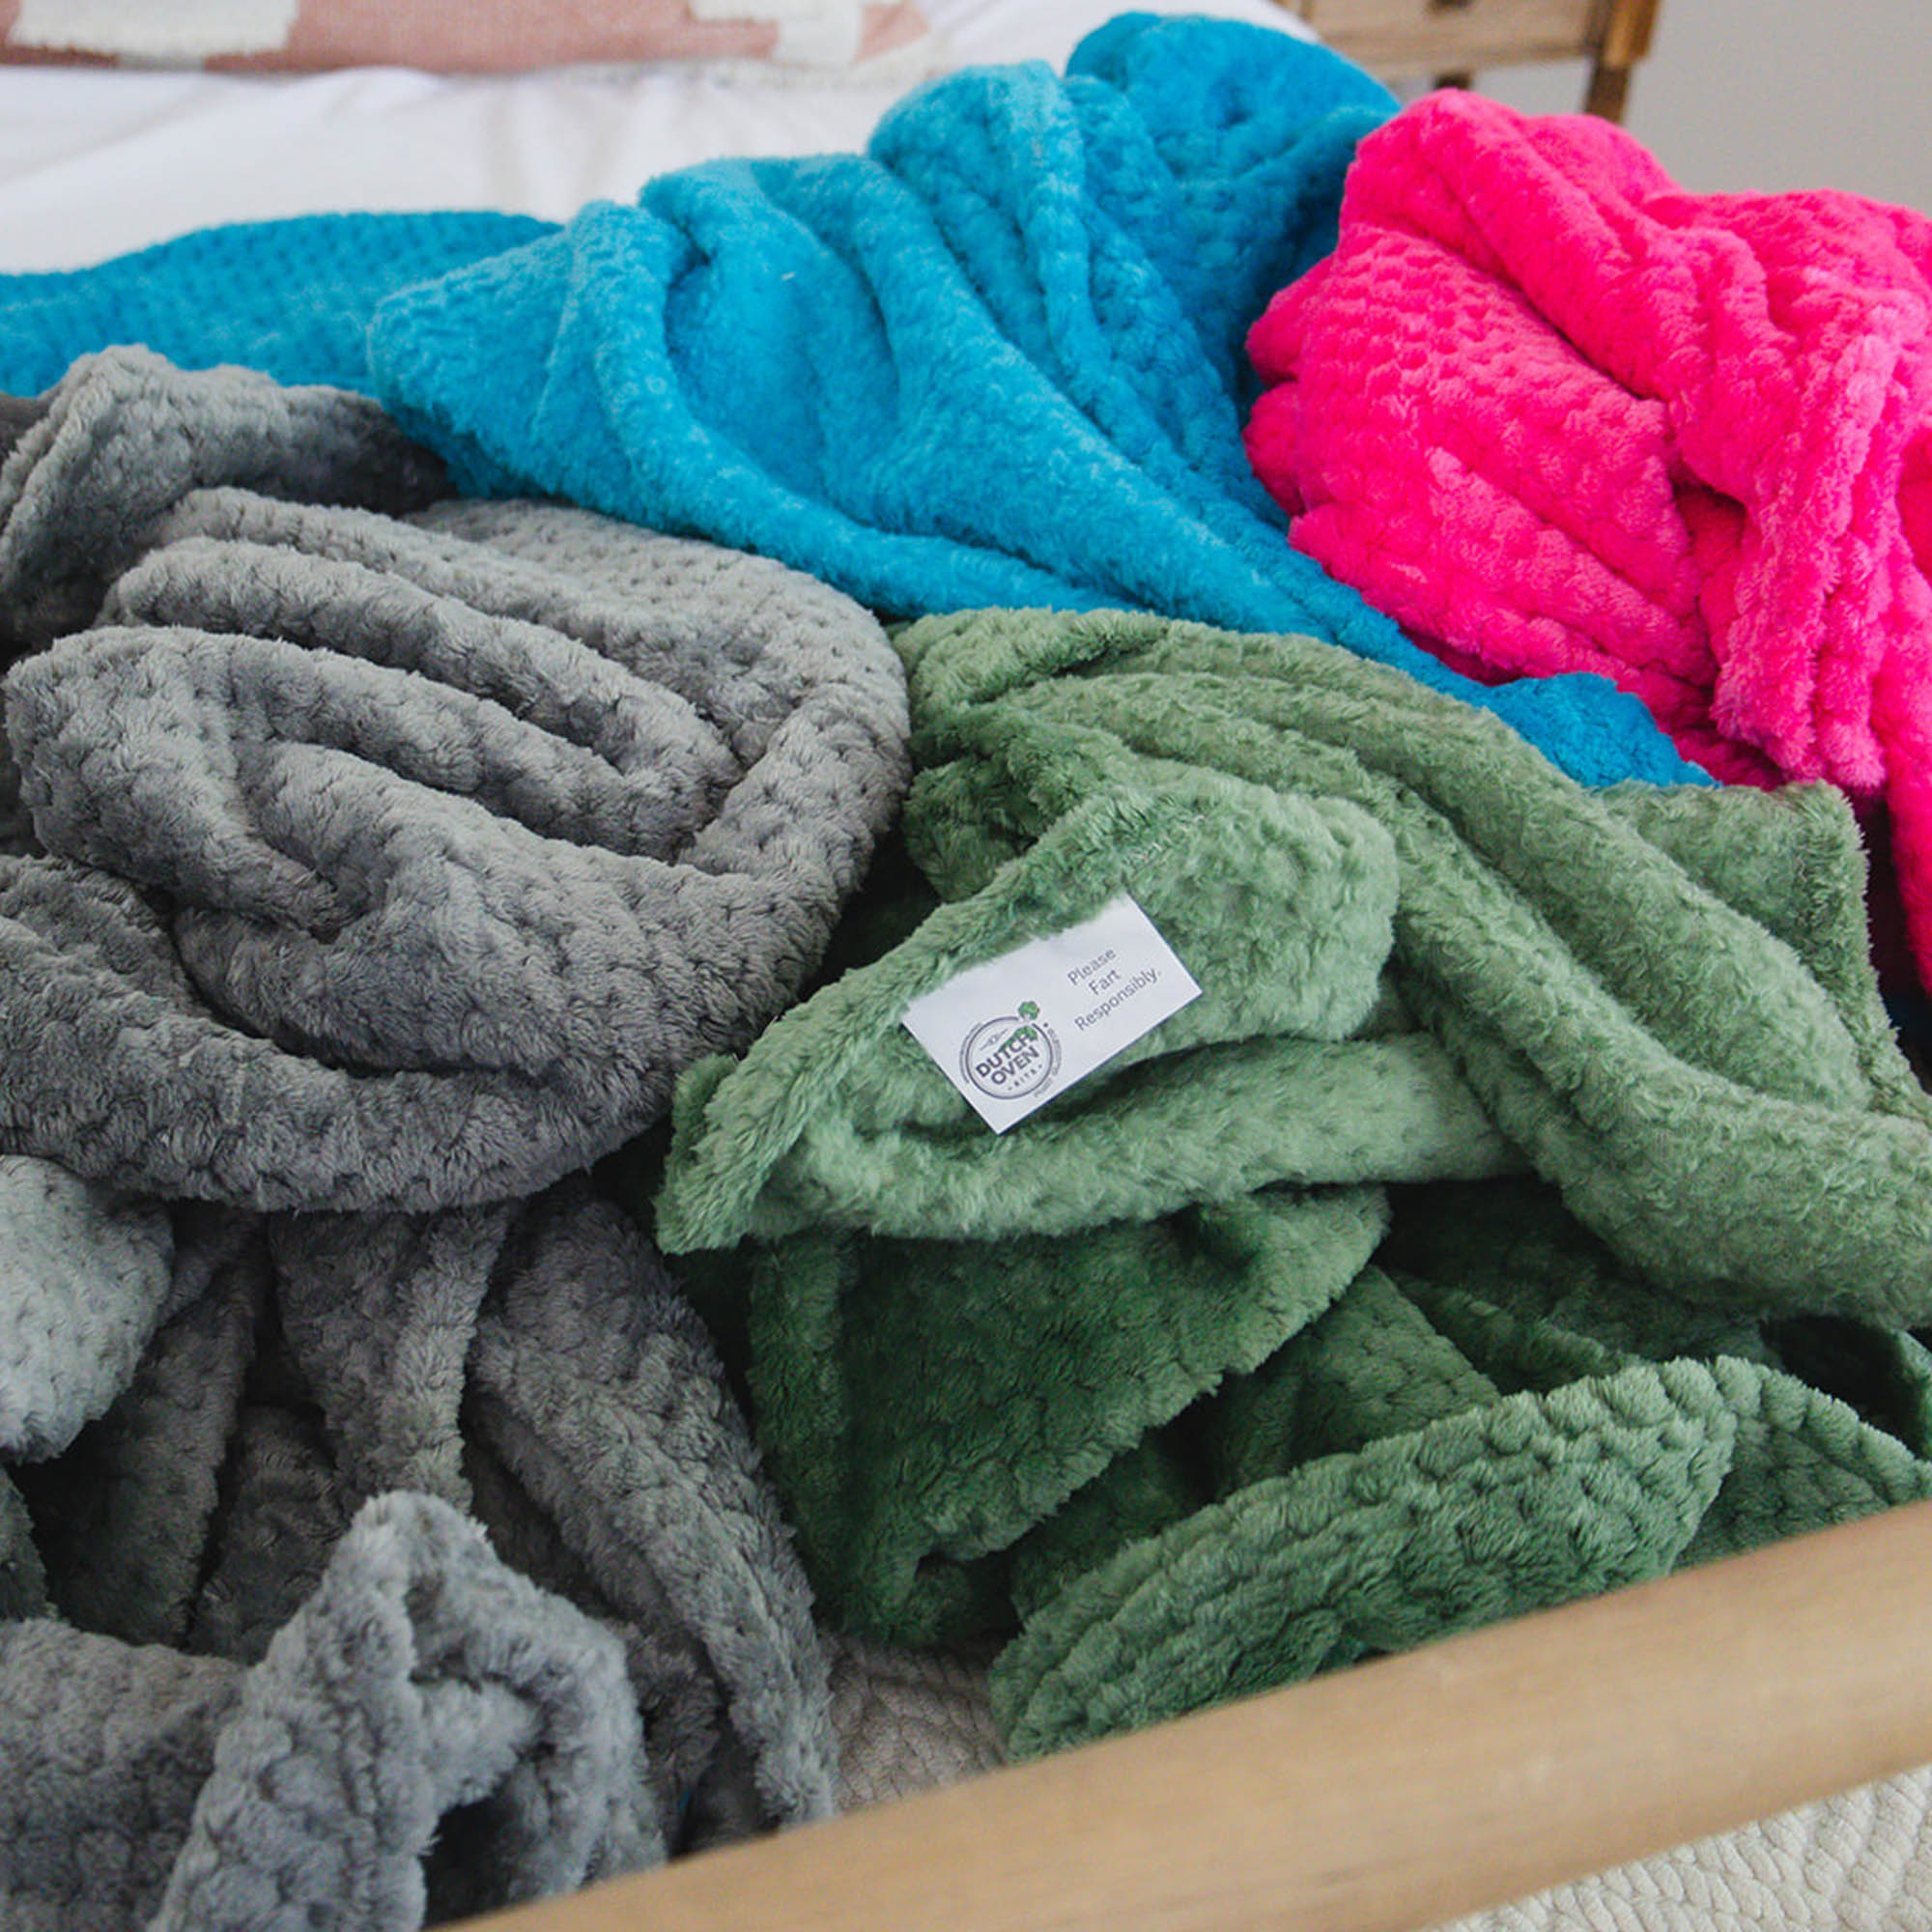 Picture of a pile of multi colored blankets.